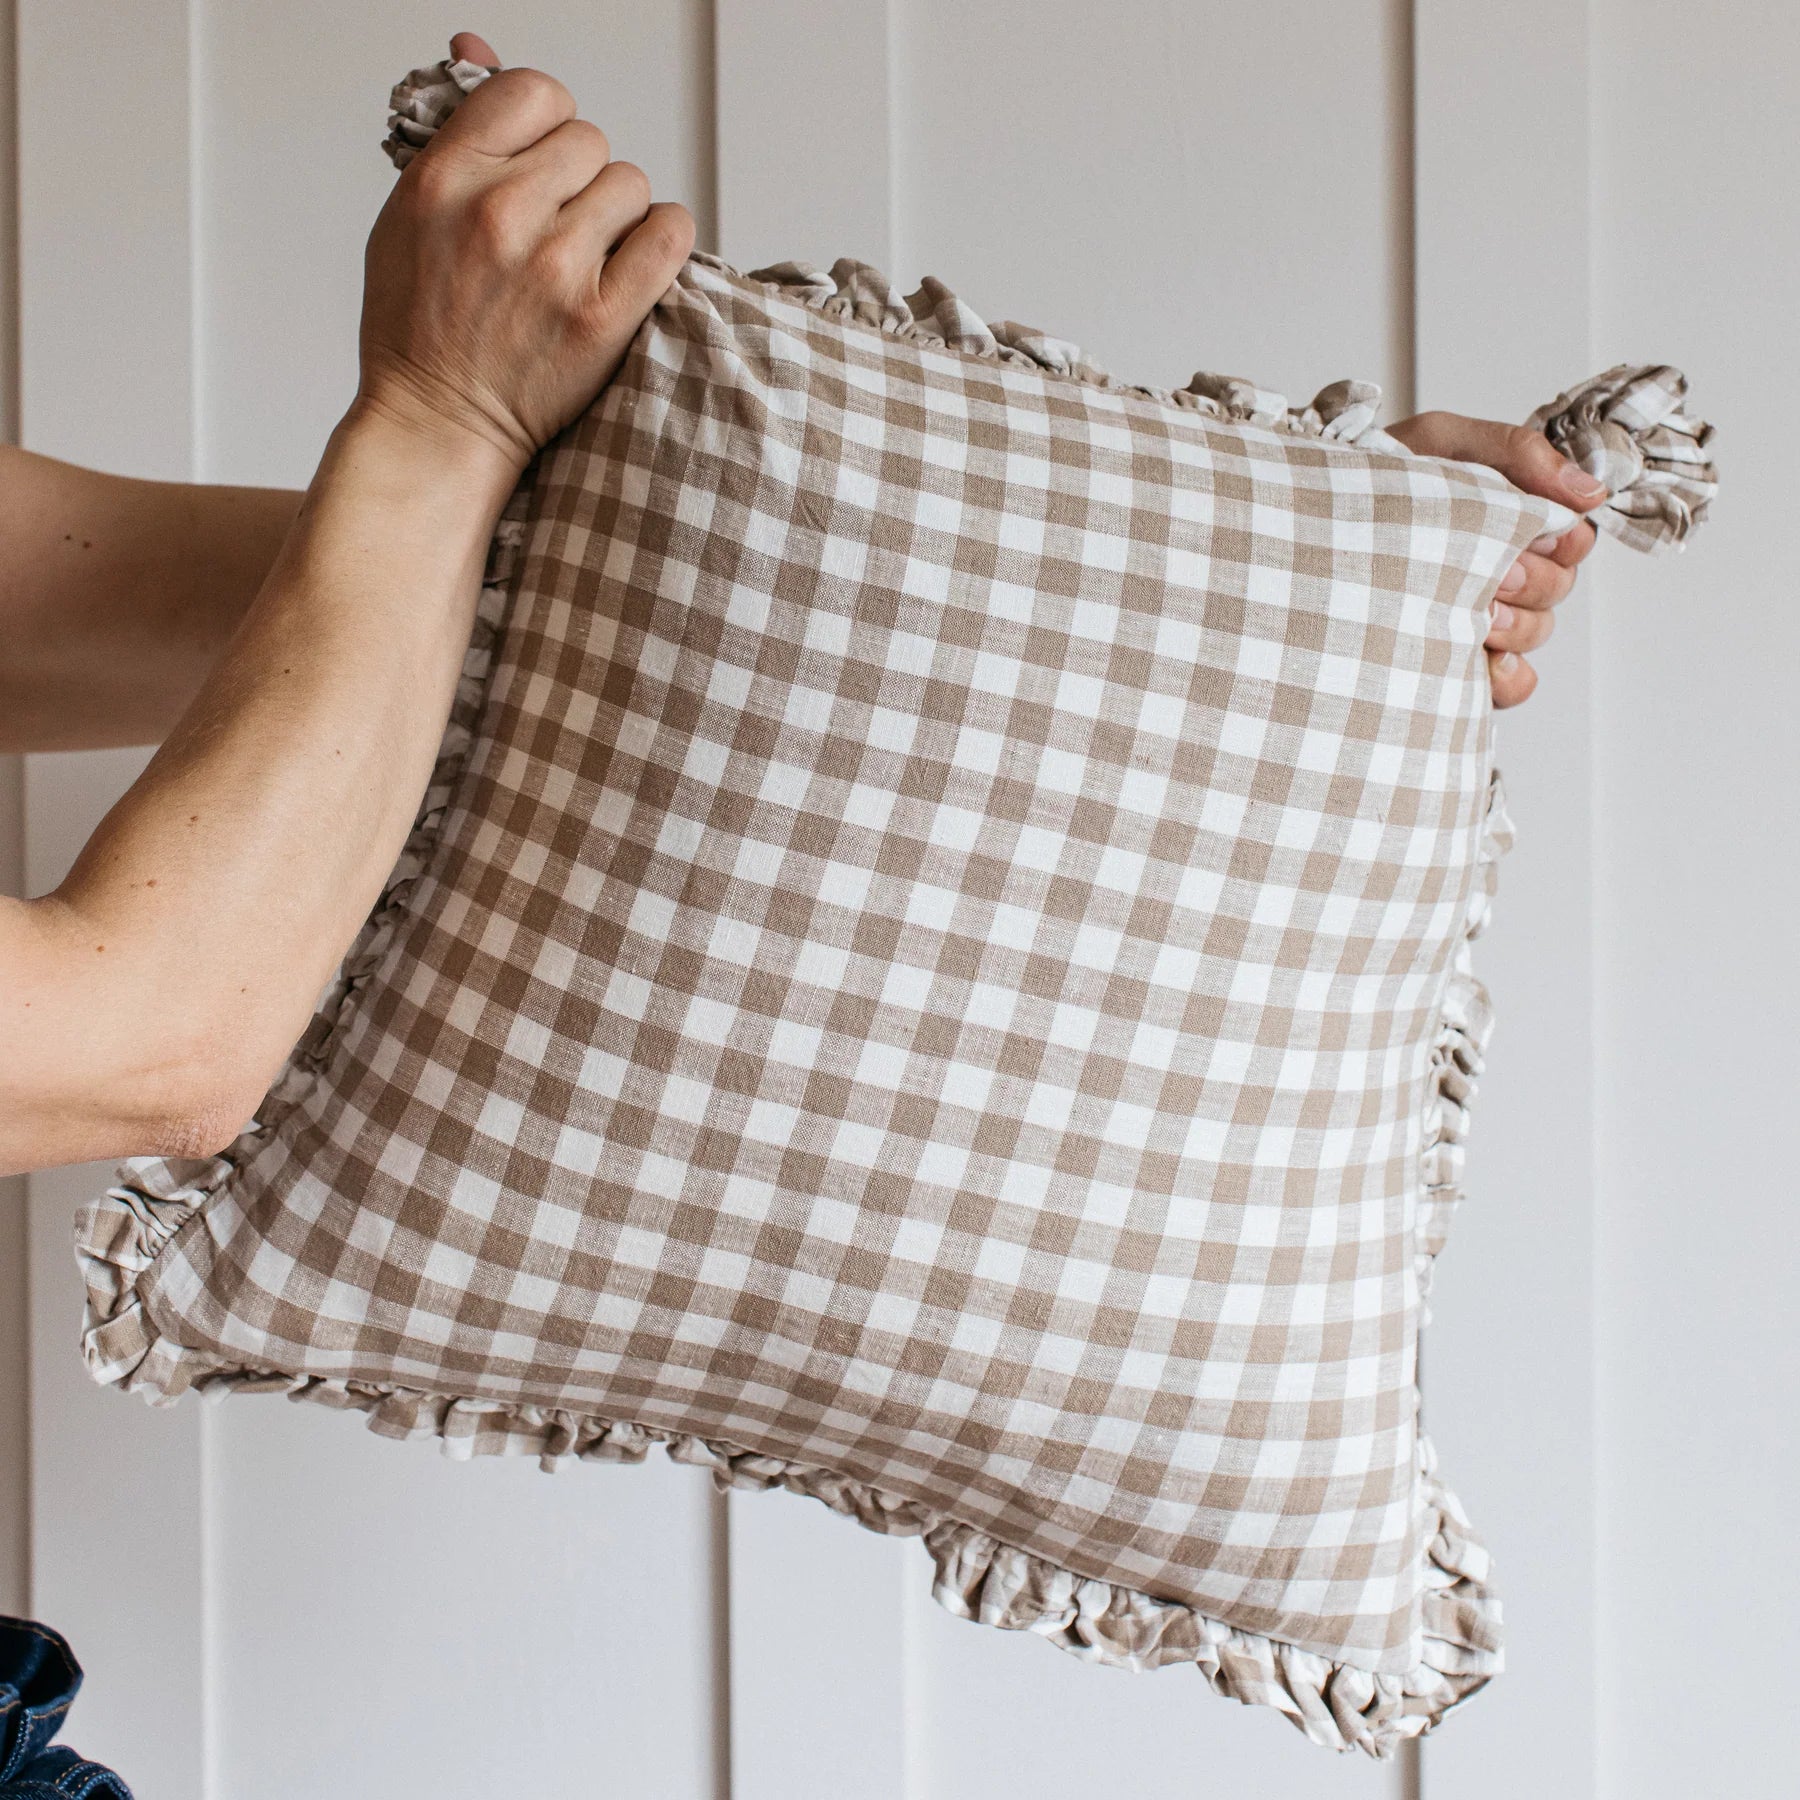 A person holds a neutral gingham ruffle cushion by each corner, there is a cream panelled wall in the background.